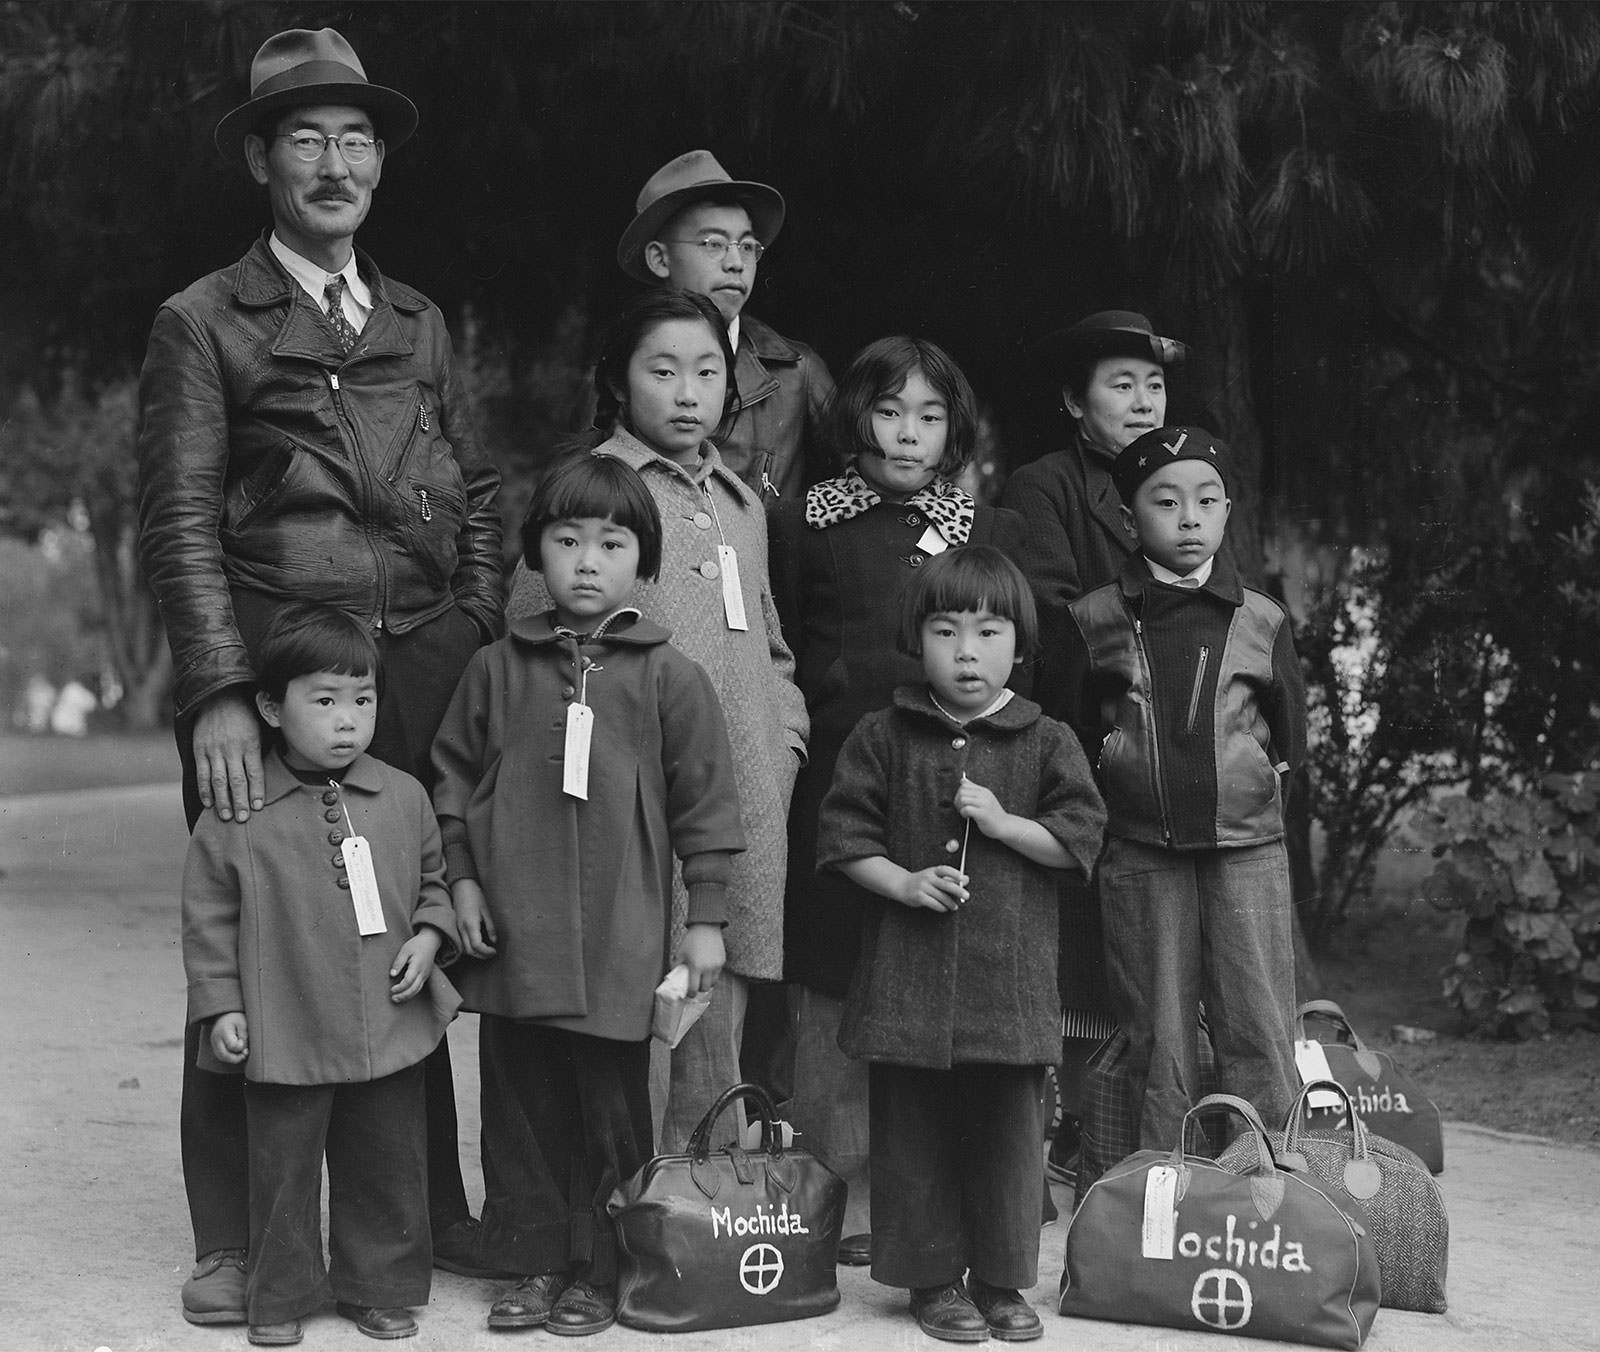 The Mochida family before their relocation to an internment camp for Japanese Americans